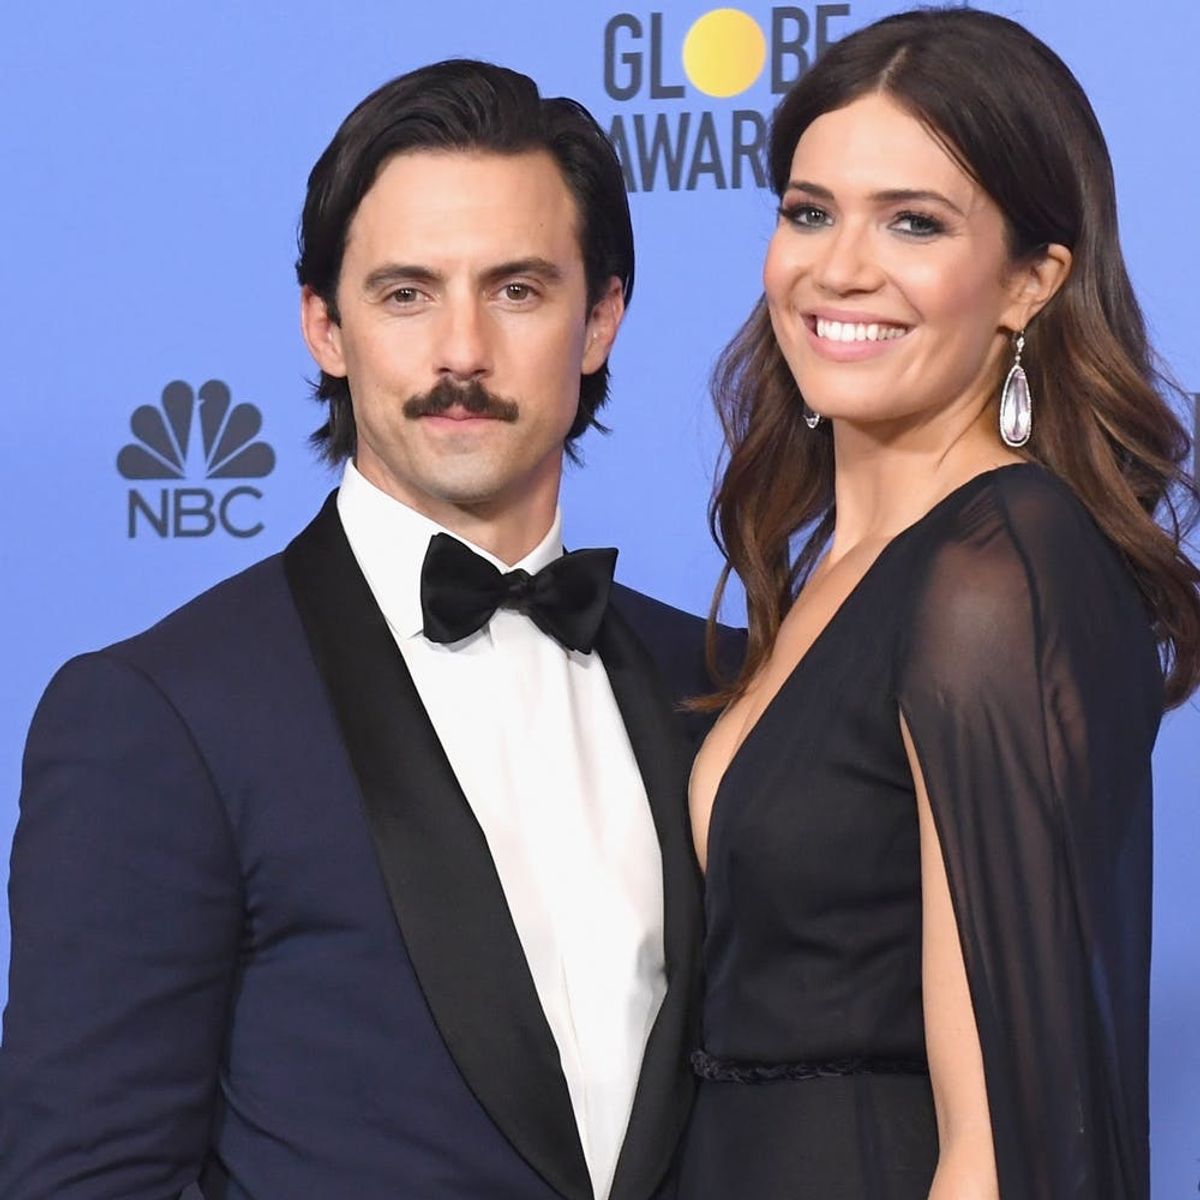 Milo Ventimiglia Just Made This Sweet Gesture for “This Is Us” Costar Mandy Moore